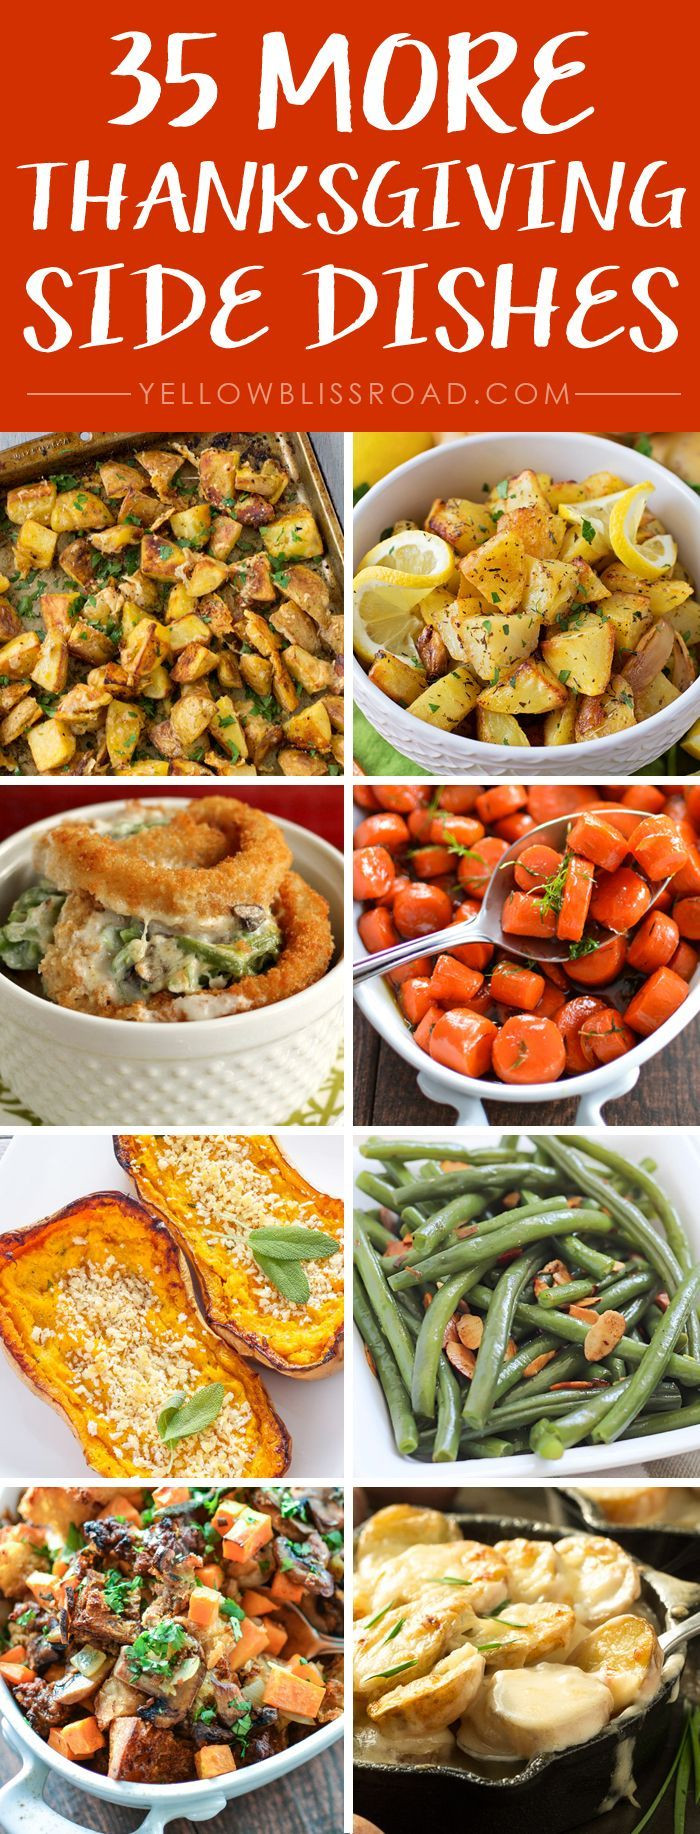 Ideas For Thanksgiving Dinner Side Dishes
 17 Best images about Thanksgiving ideas on Pinterest